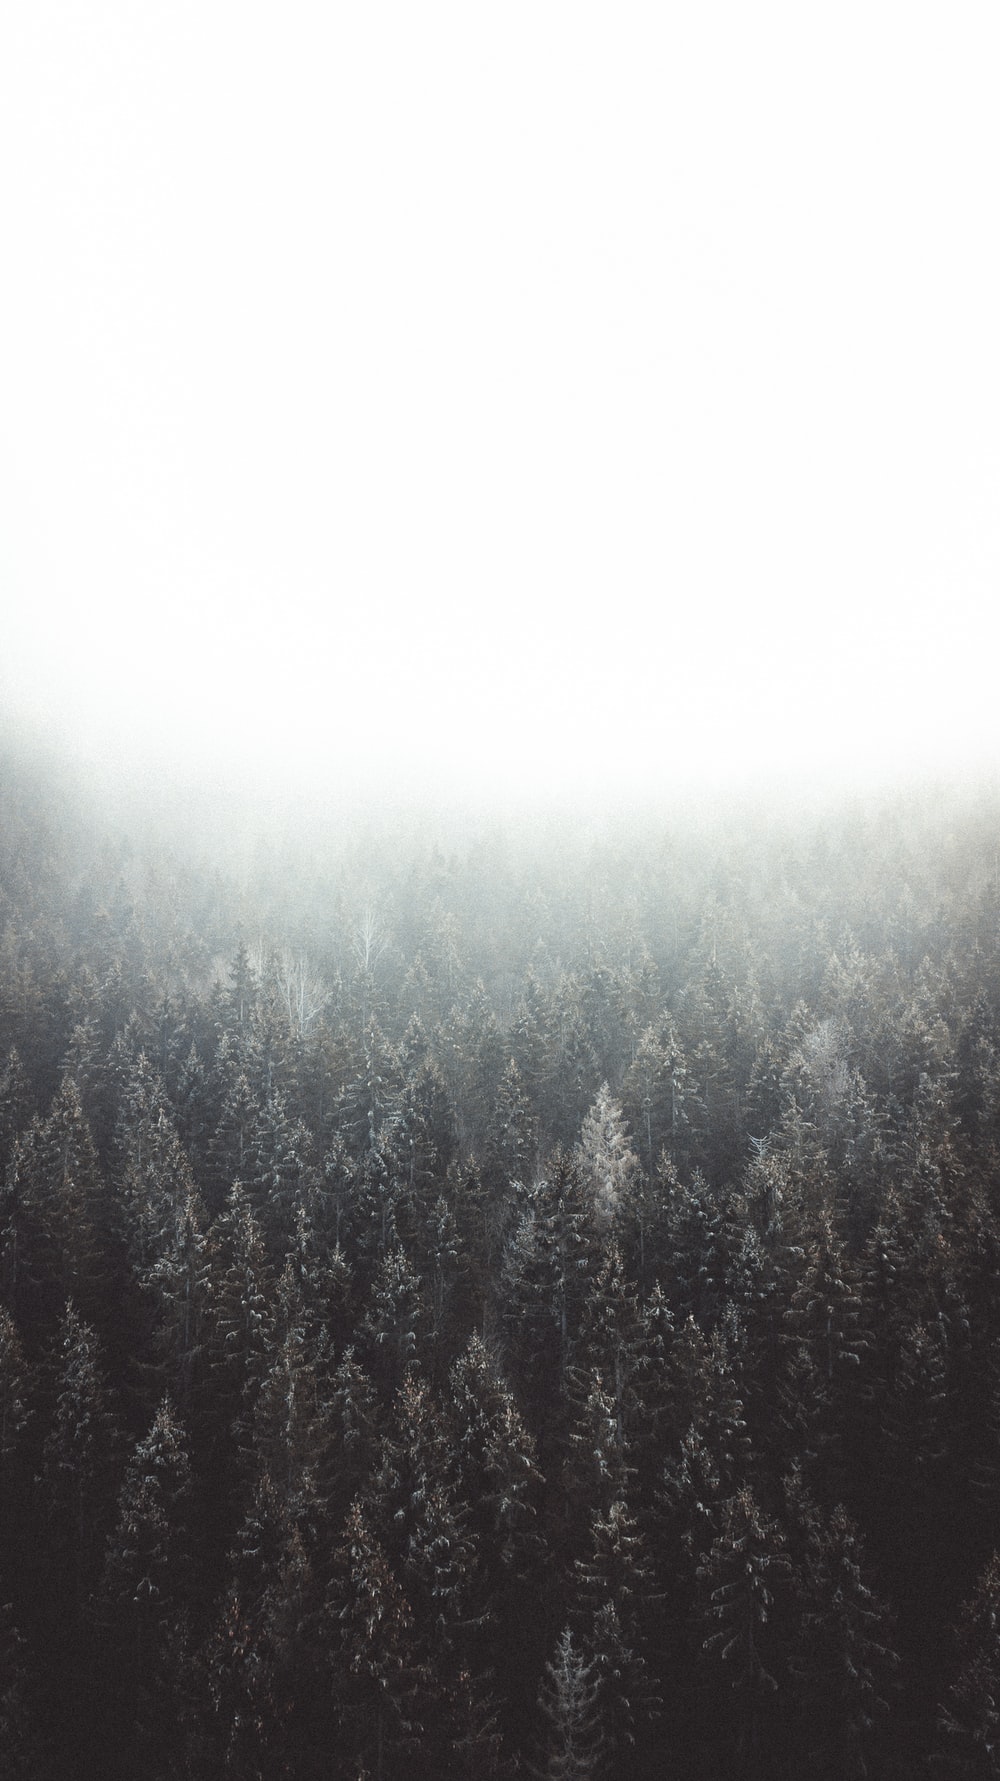 Foggy Background Picture. Download Free Image